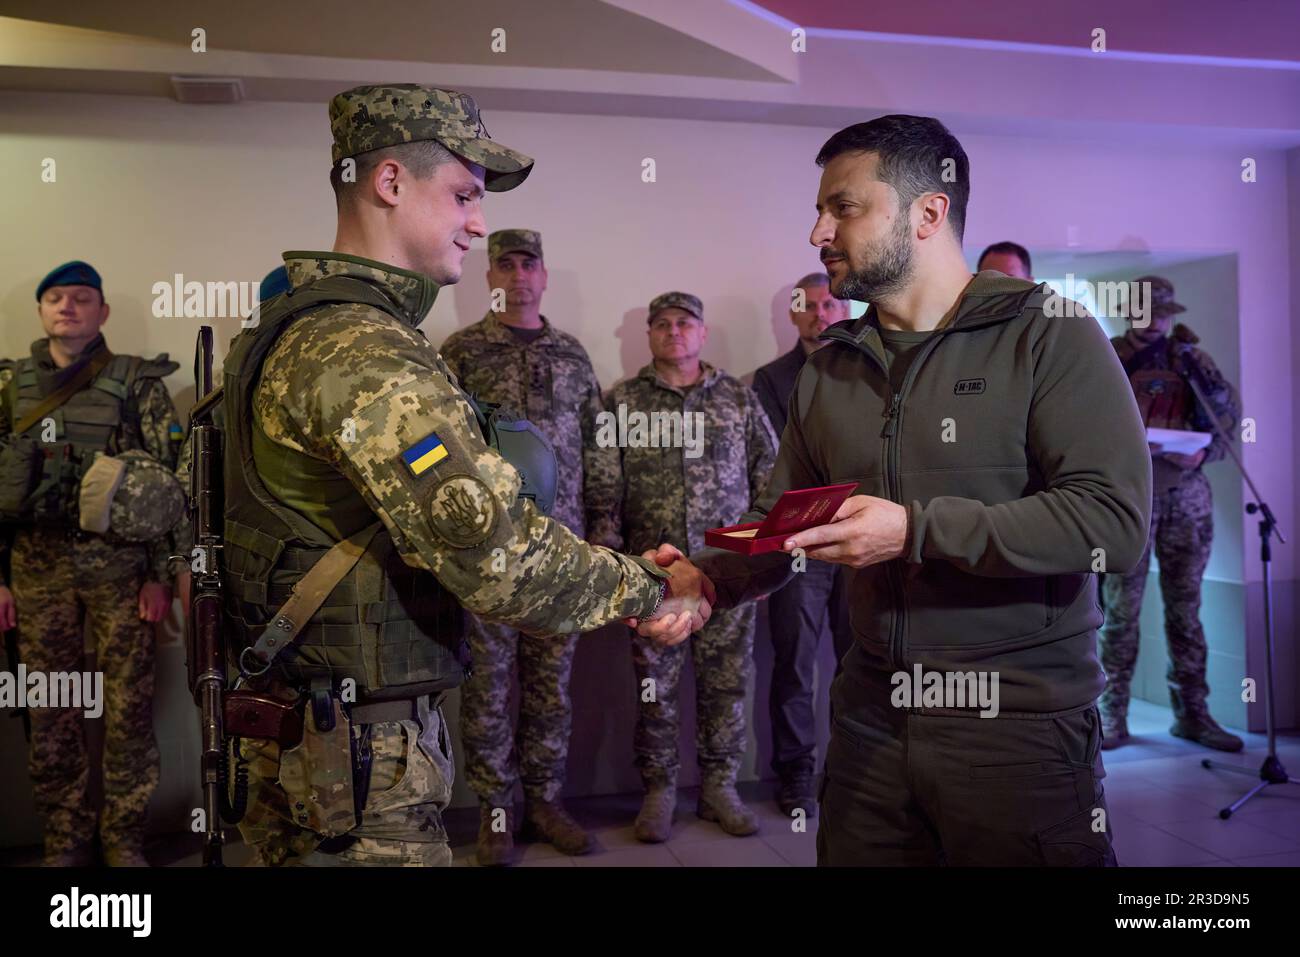 Having returned from a visit abroad, Ukraine President Volodymyr Zelensky visited the frontline positions of the Armed Forces of Ukraine in the Vuhledar – Maryinka defense area in the Donetsk region on the occasion of the Day of the Marines.   The Supreme Commander-in-Chief listened to the report by Lieutenant General Yuriy Sodol, Commander of the Marines and the Donetsk Operational Tactical Group, on the current situation in the designated area of the frontline.  The President spoke to the Ukrainian warriors and took part in the festivities. (Photo: Ukraine Presidential Office) Stock Photo